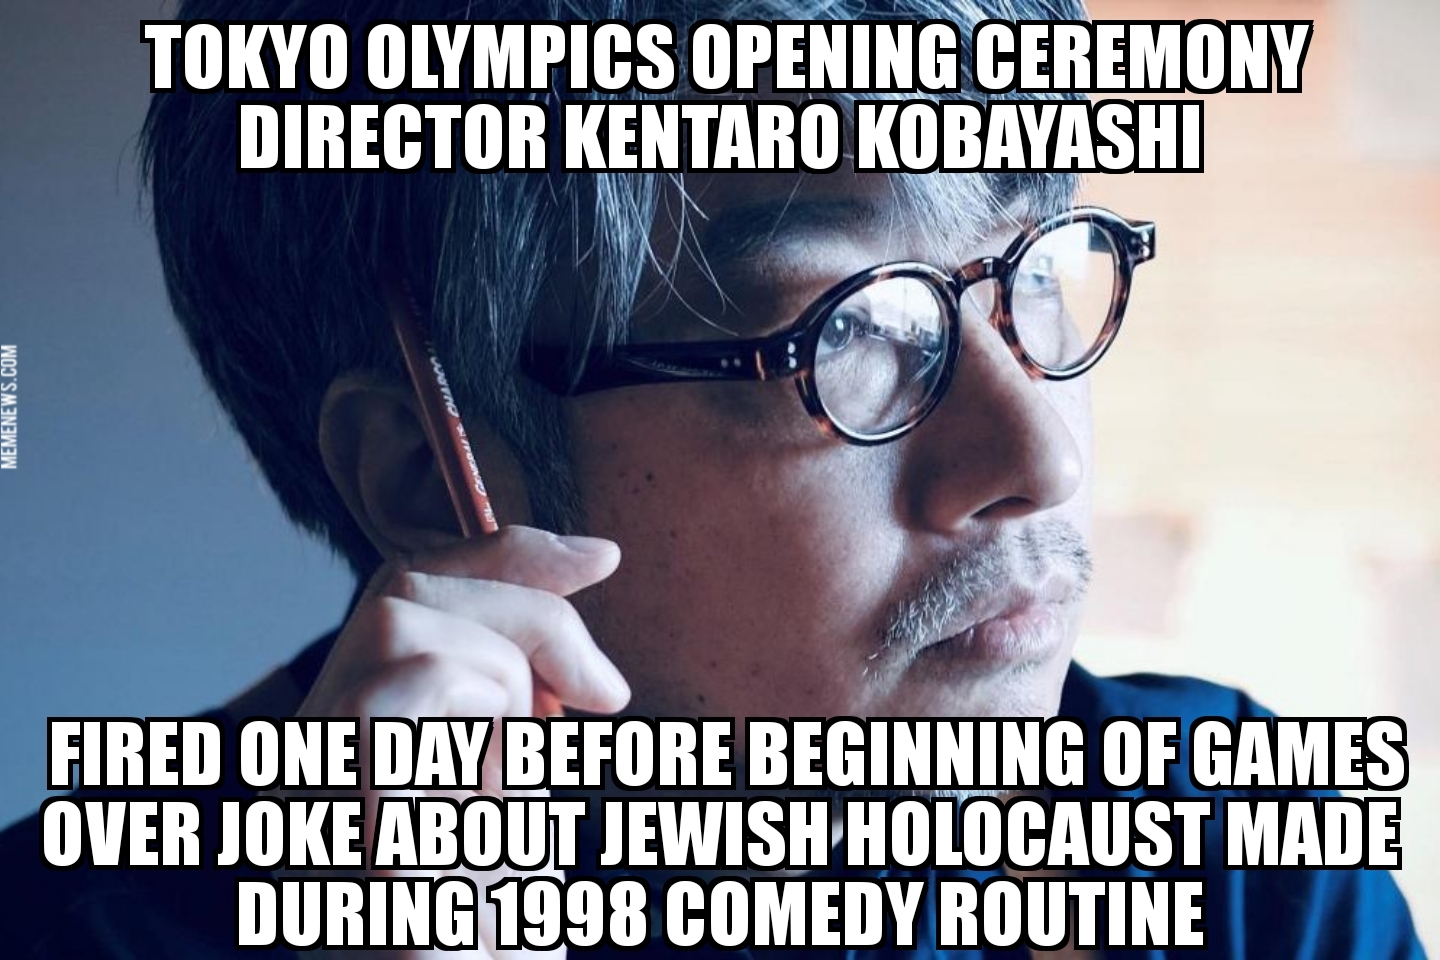 Tokyo Olympics opening ceremony director fired